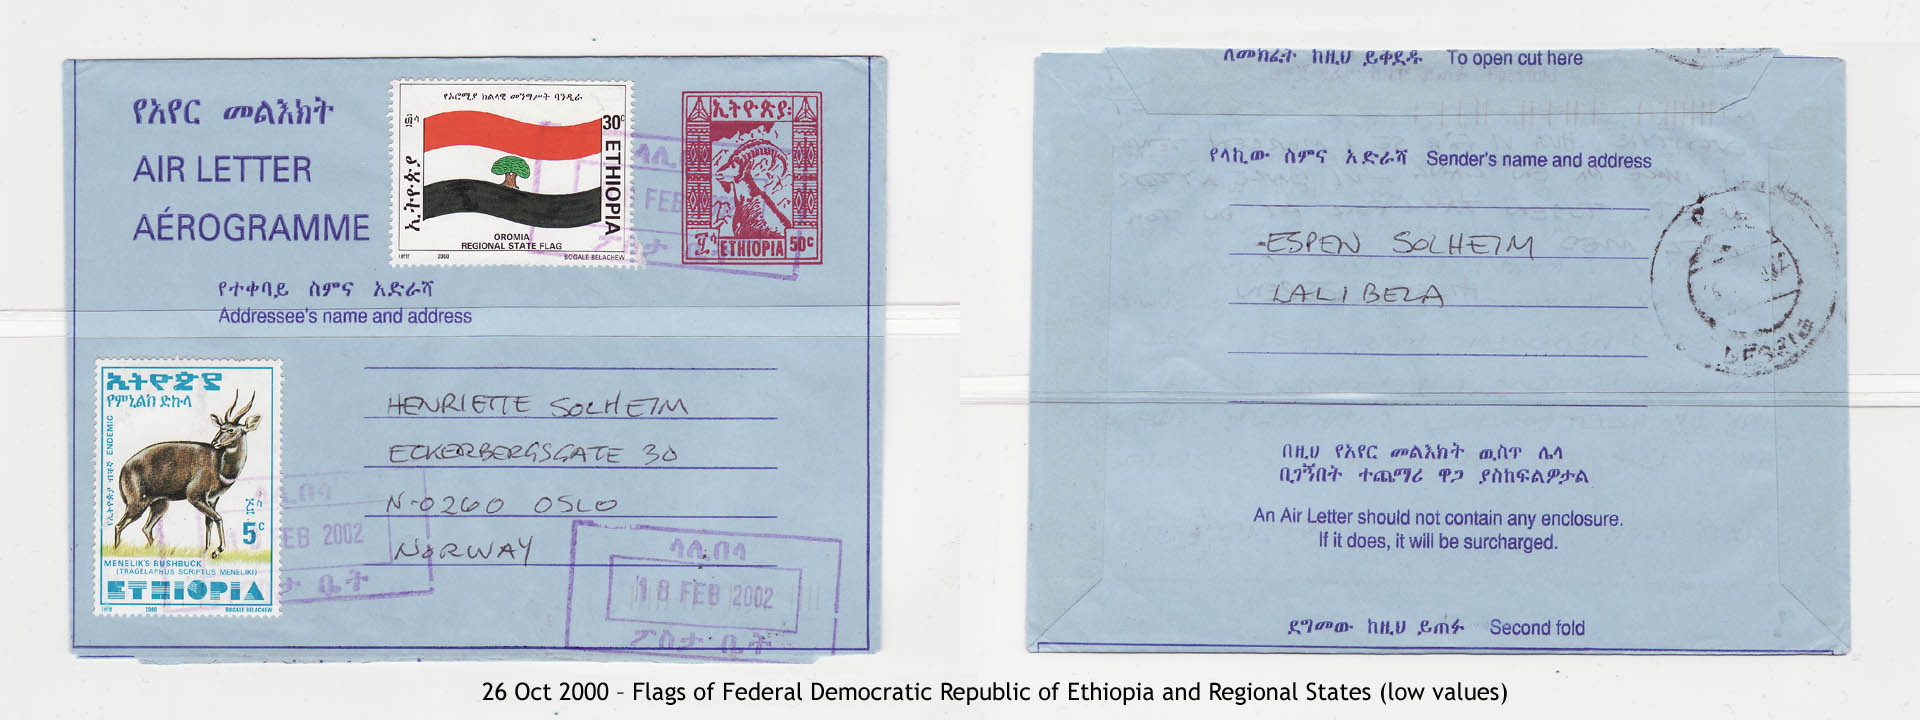 20001026 – Flags of Federal Democratic Republic of Ethiopia and Regional States (low values)